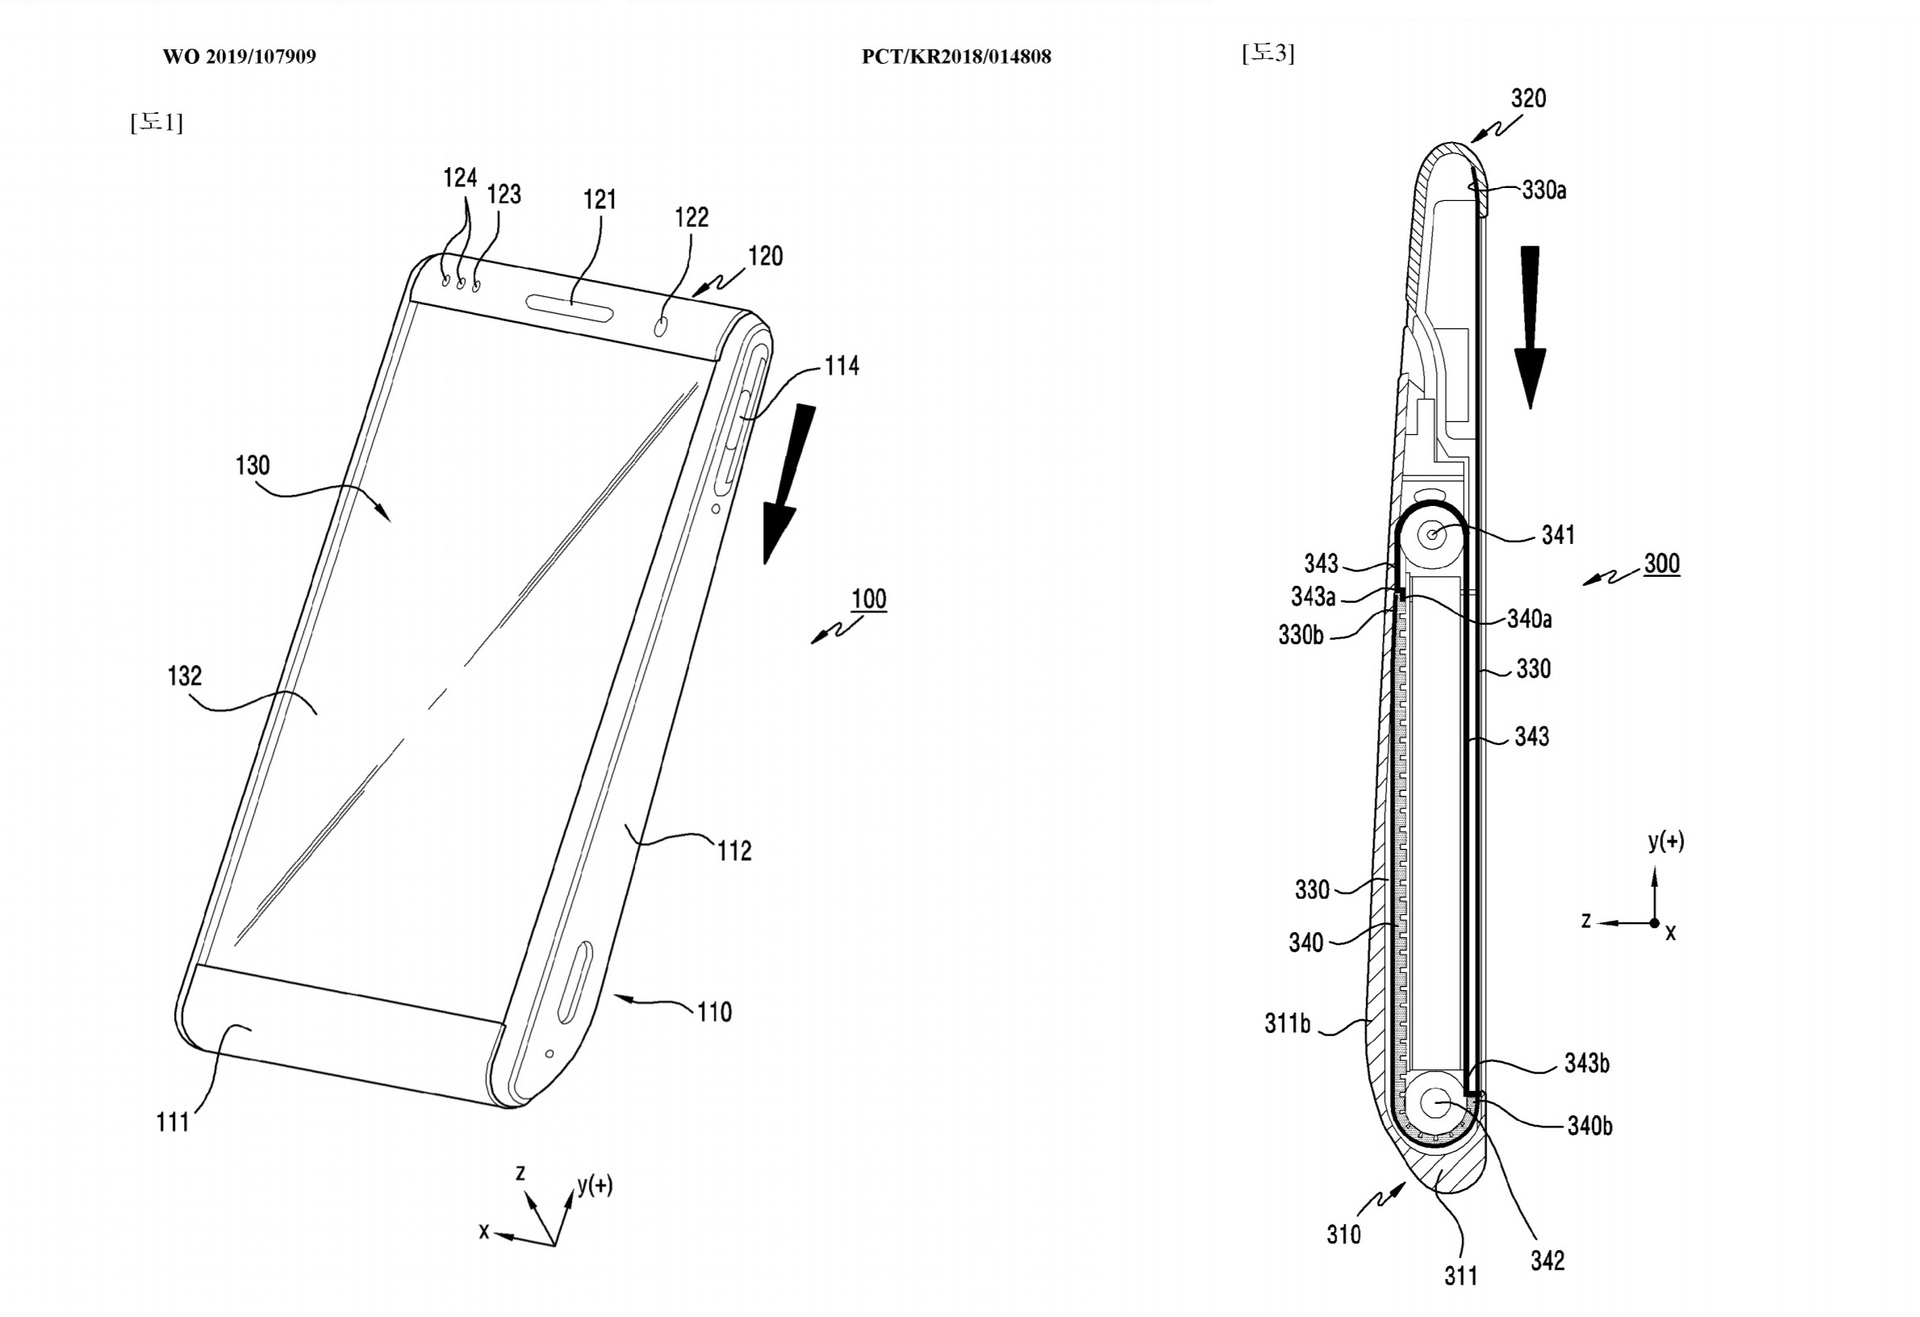 Samsung Galaxy rolling phone patent images showing two designs.